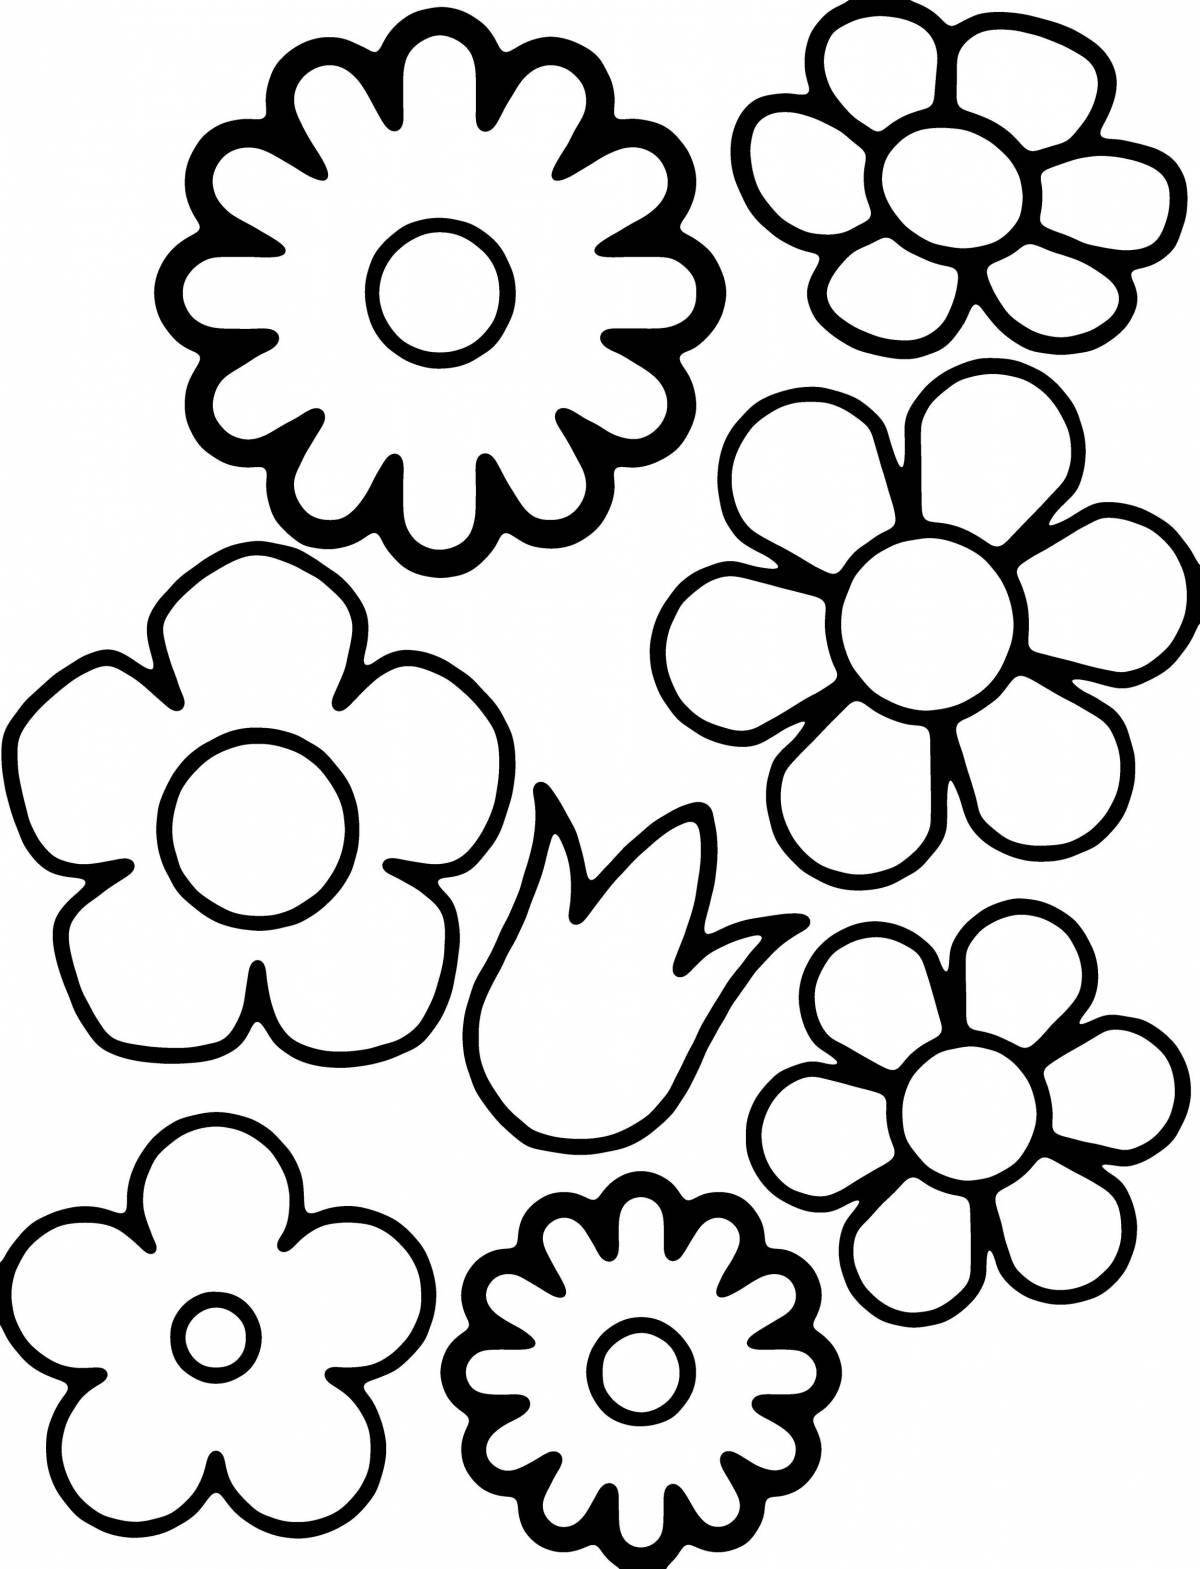 Coloring page fascinating flower pattern